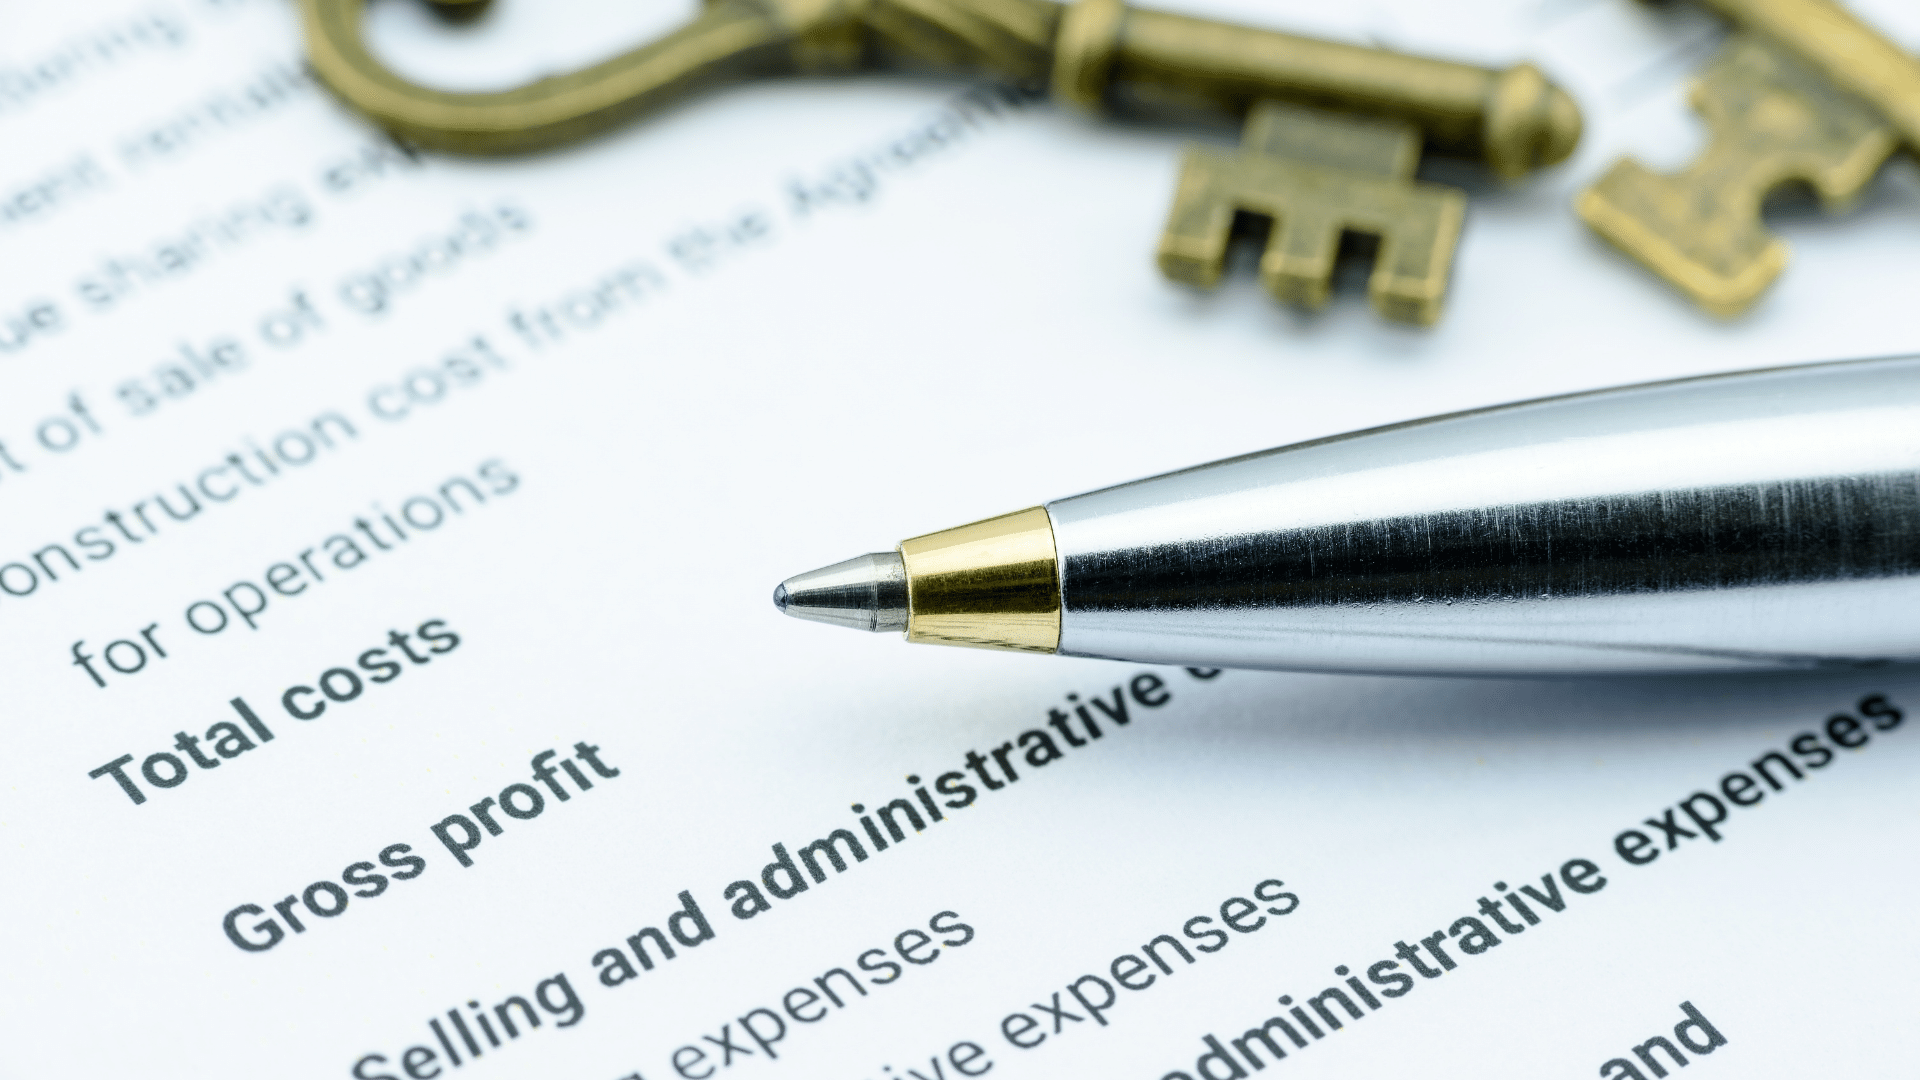 An image of an incorporated business's financial document with a pen and keys sitting on top of the paper